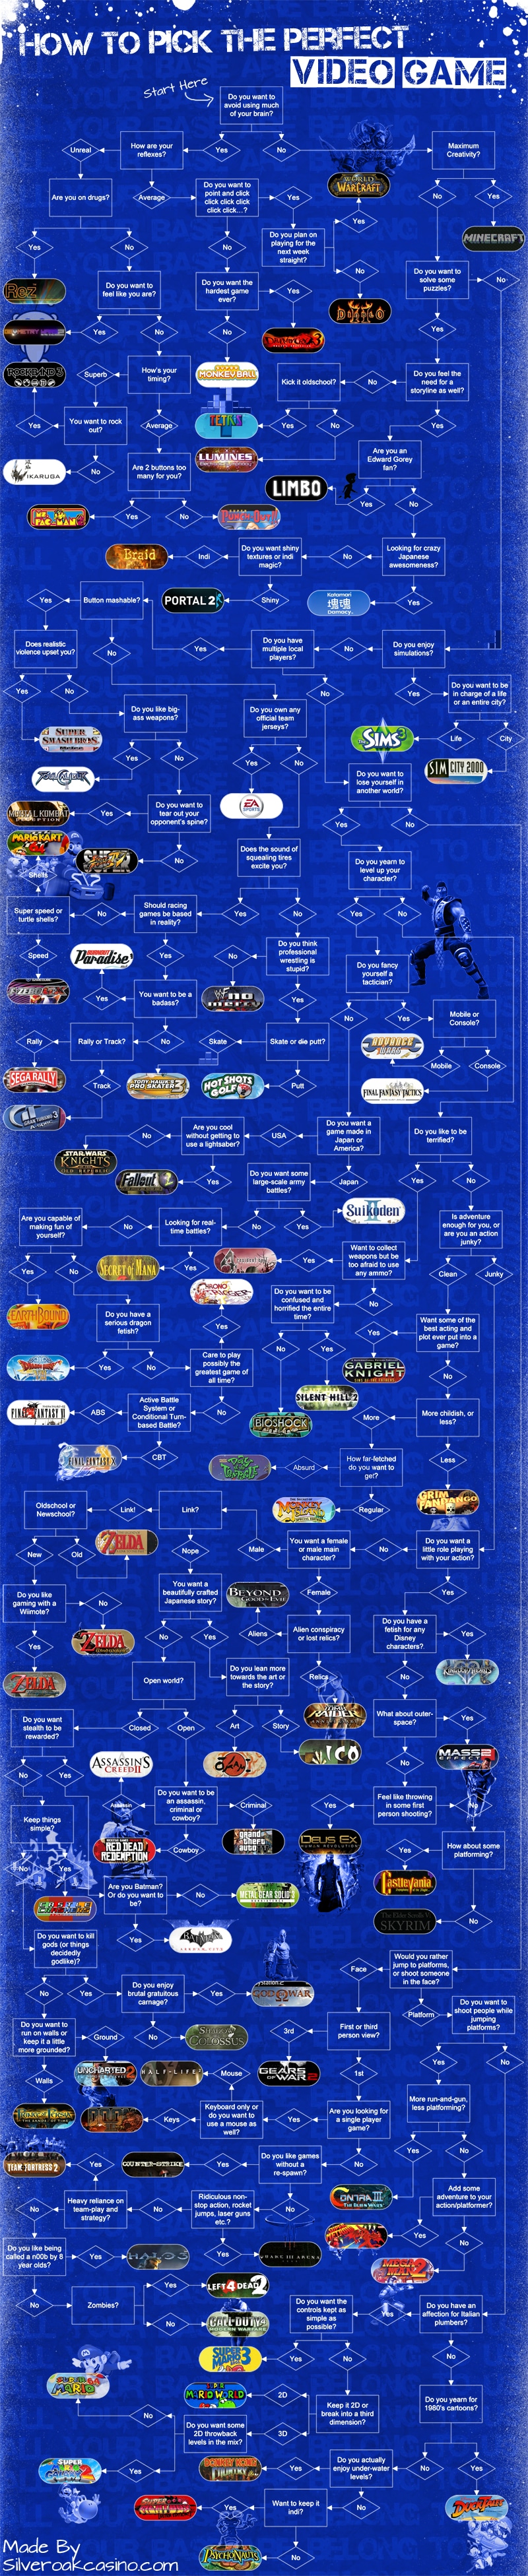 How To Pick The Perfect Video Game [Flowchart]